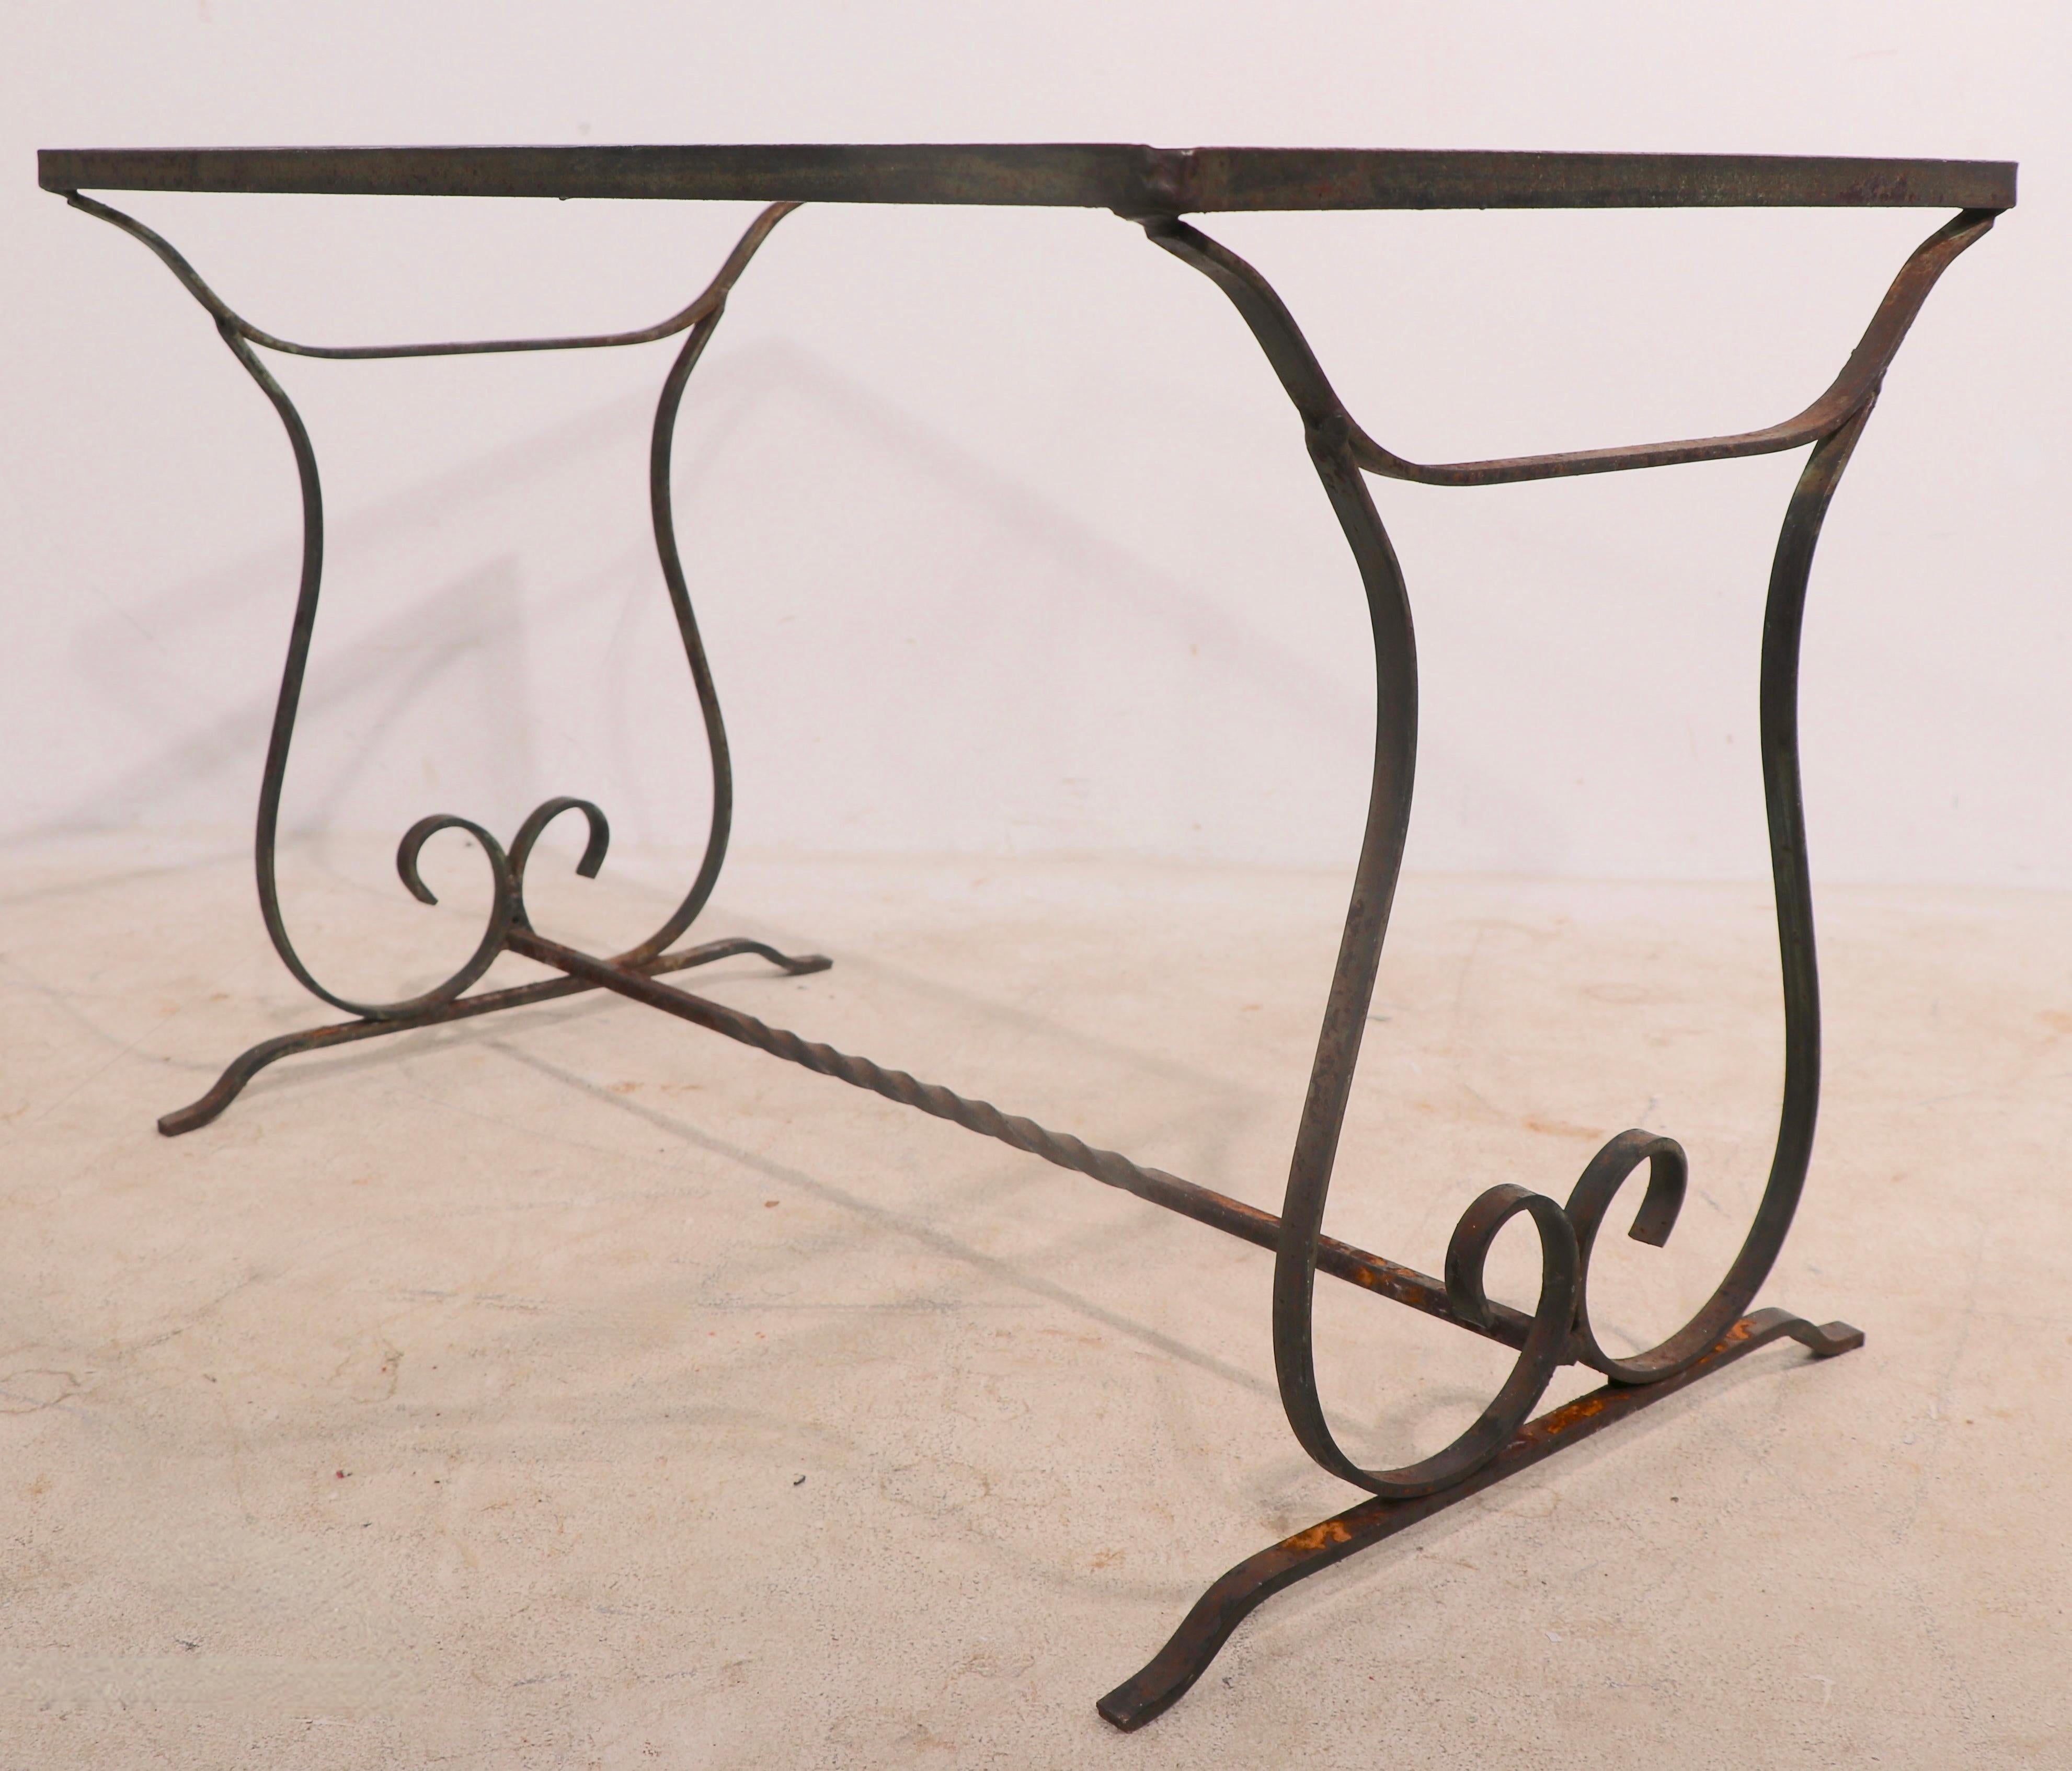 American Classical Wrought Iron Garden Patio Poolside Coffee Table after Salterini For Sale